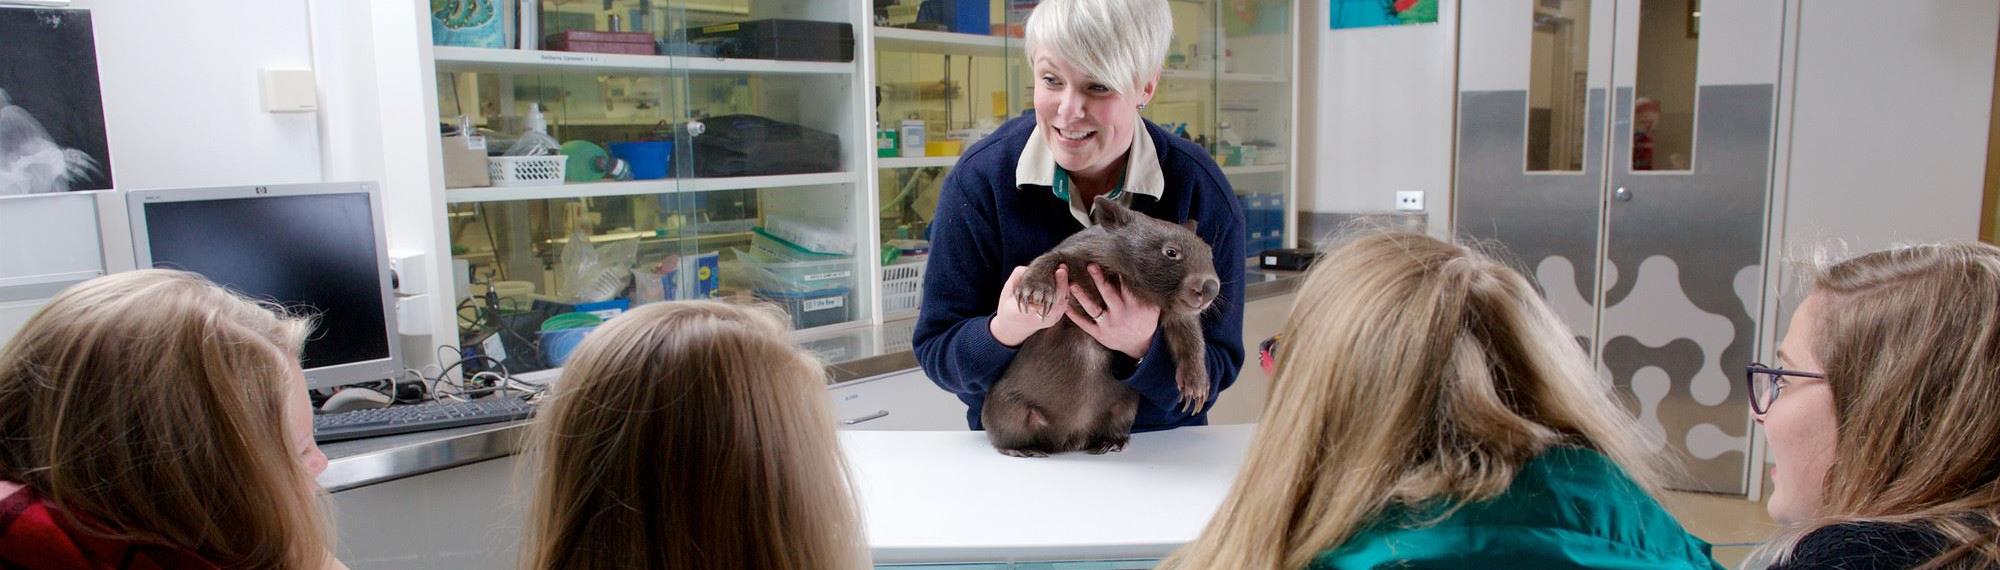 Female Vet nurse holding a young wombat on an examination table while four students look on.